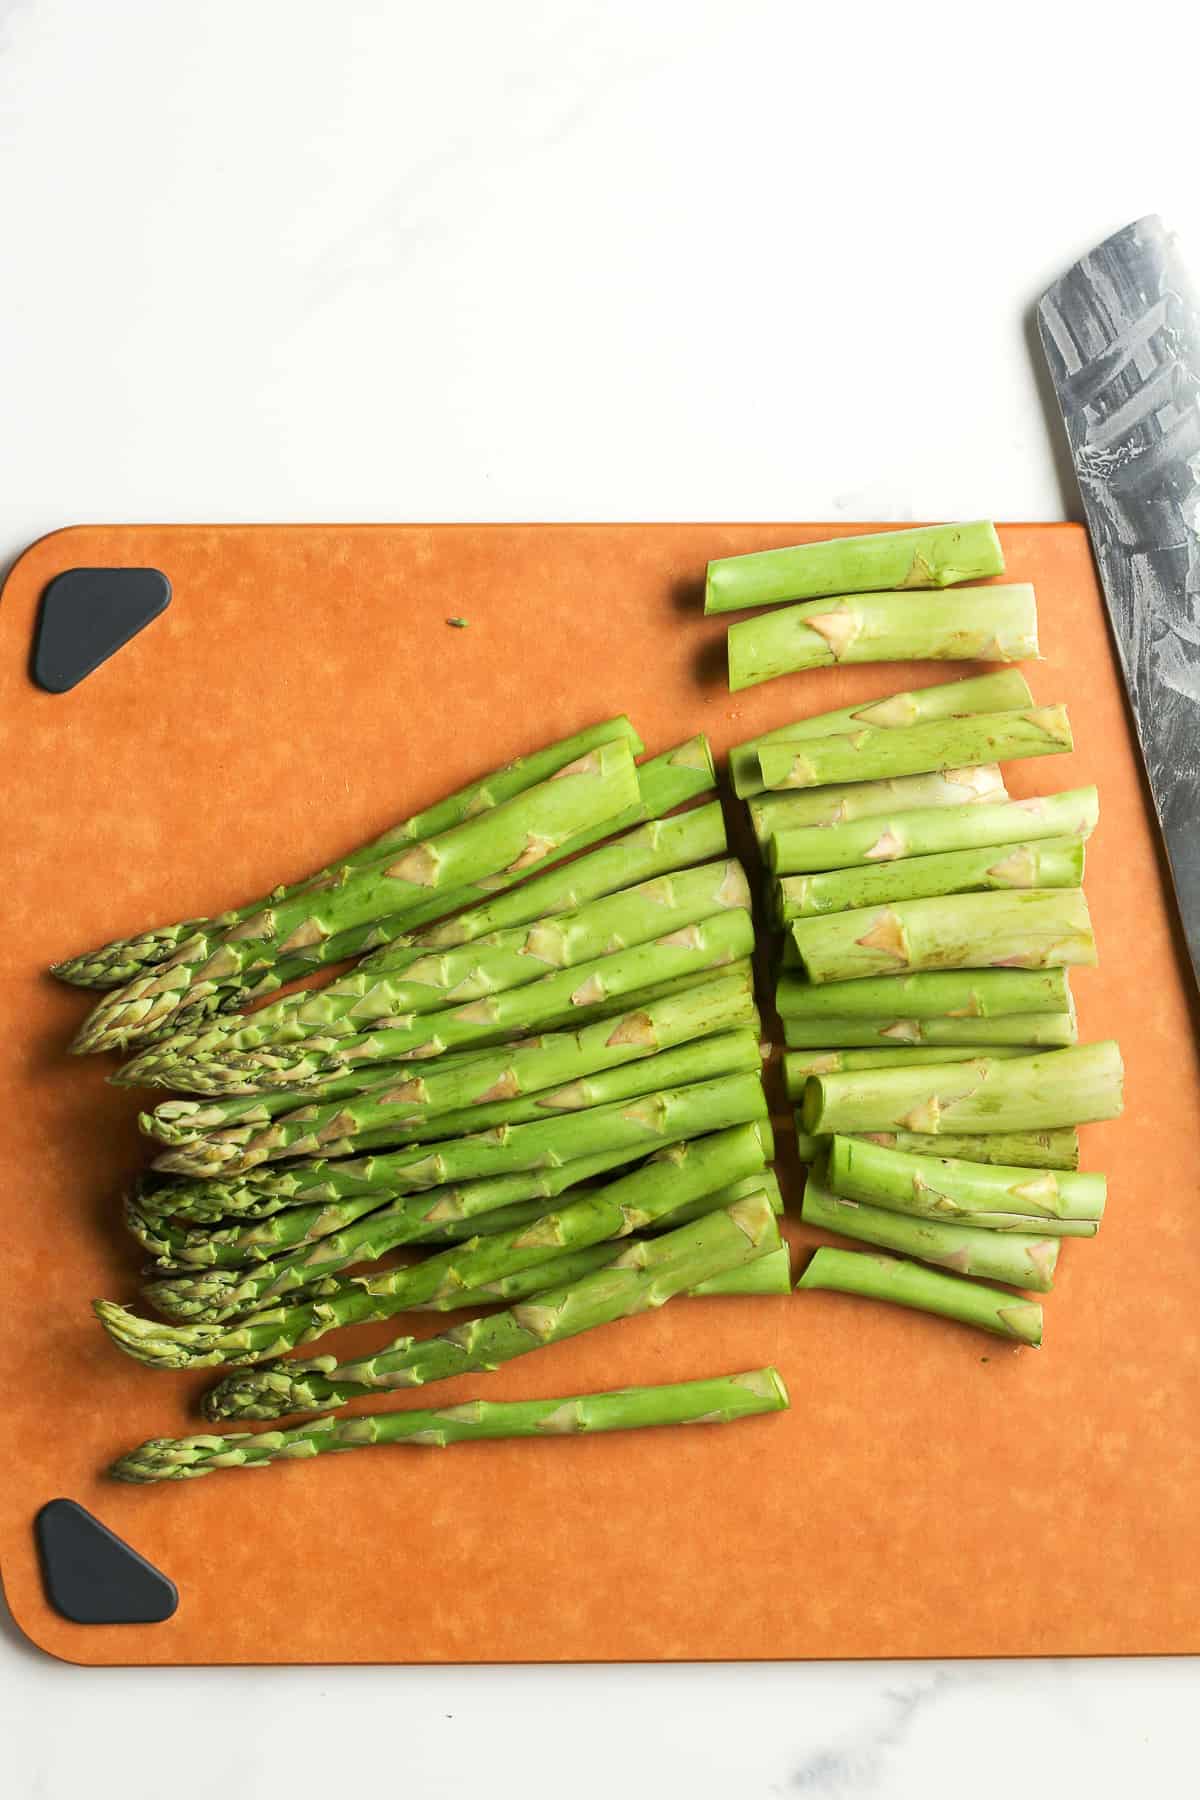 A cutting board of the asparagus with the ends trimmed off.